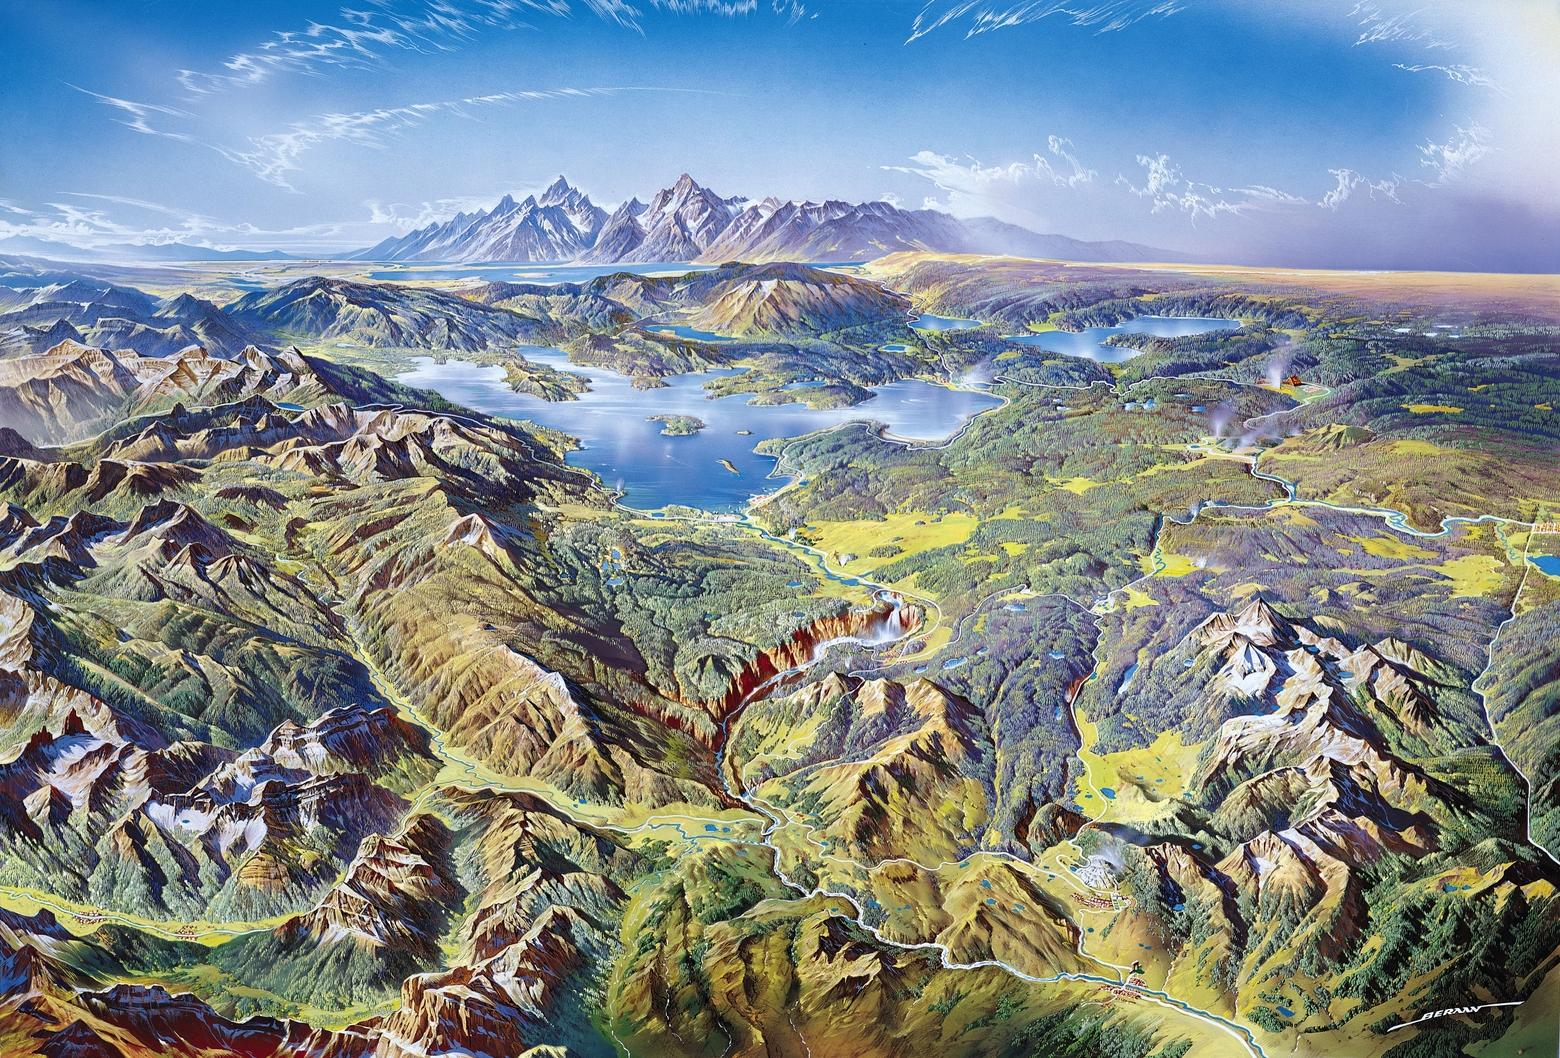 Heinrich Berann's painting of Yellowstone looking south toward Jackson Hole was commissioned by the National Park Service but it speaks to how the natural qualities of the region's public lands transcend jurisdictional boundaries.